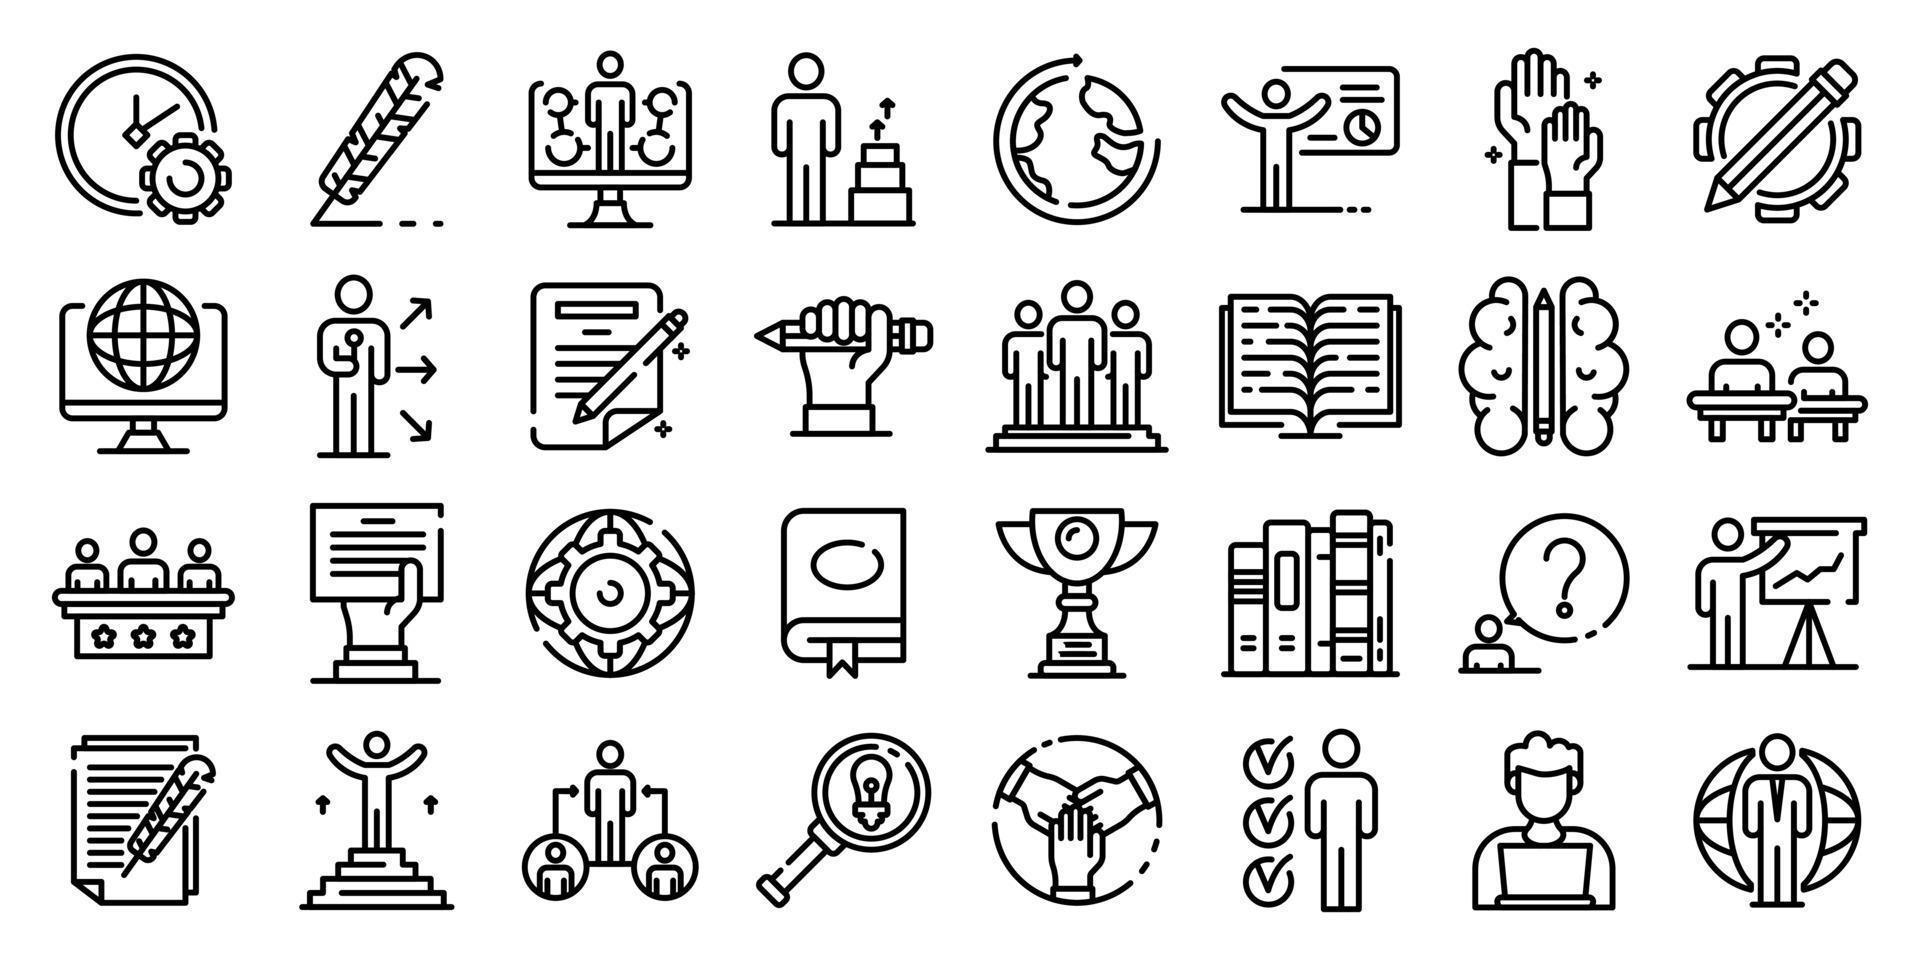 Staff education icons set, outline style vector